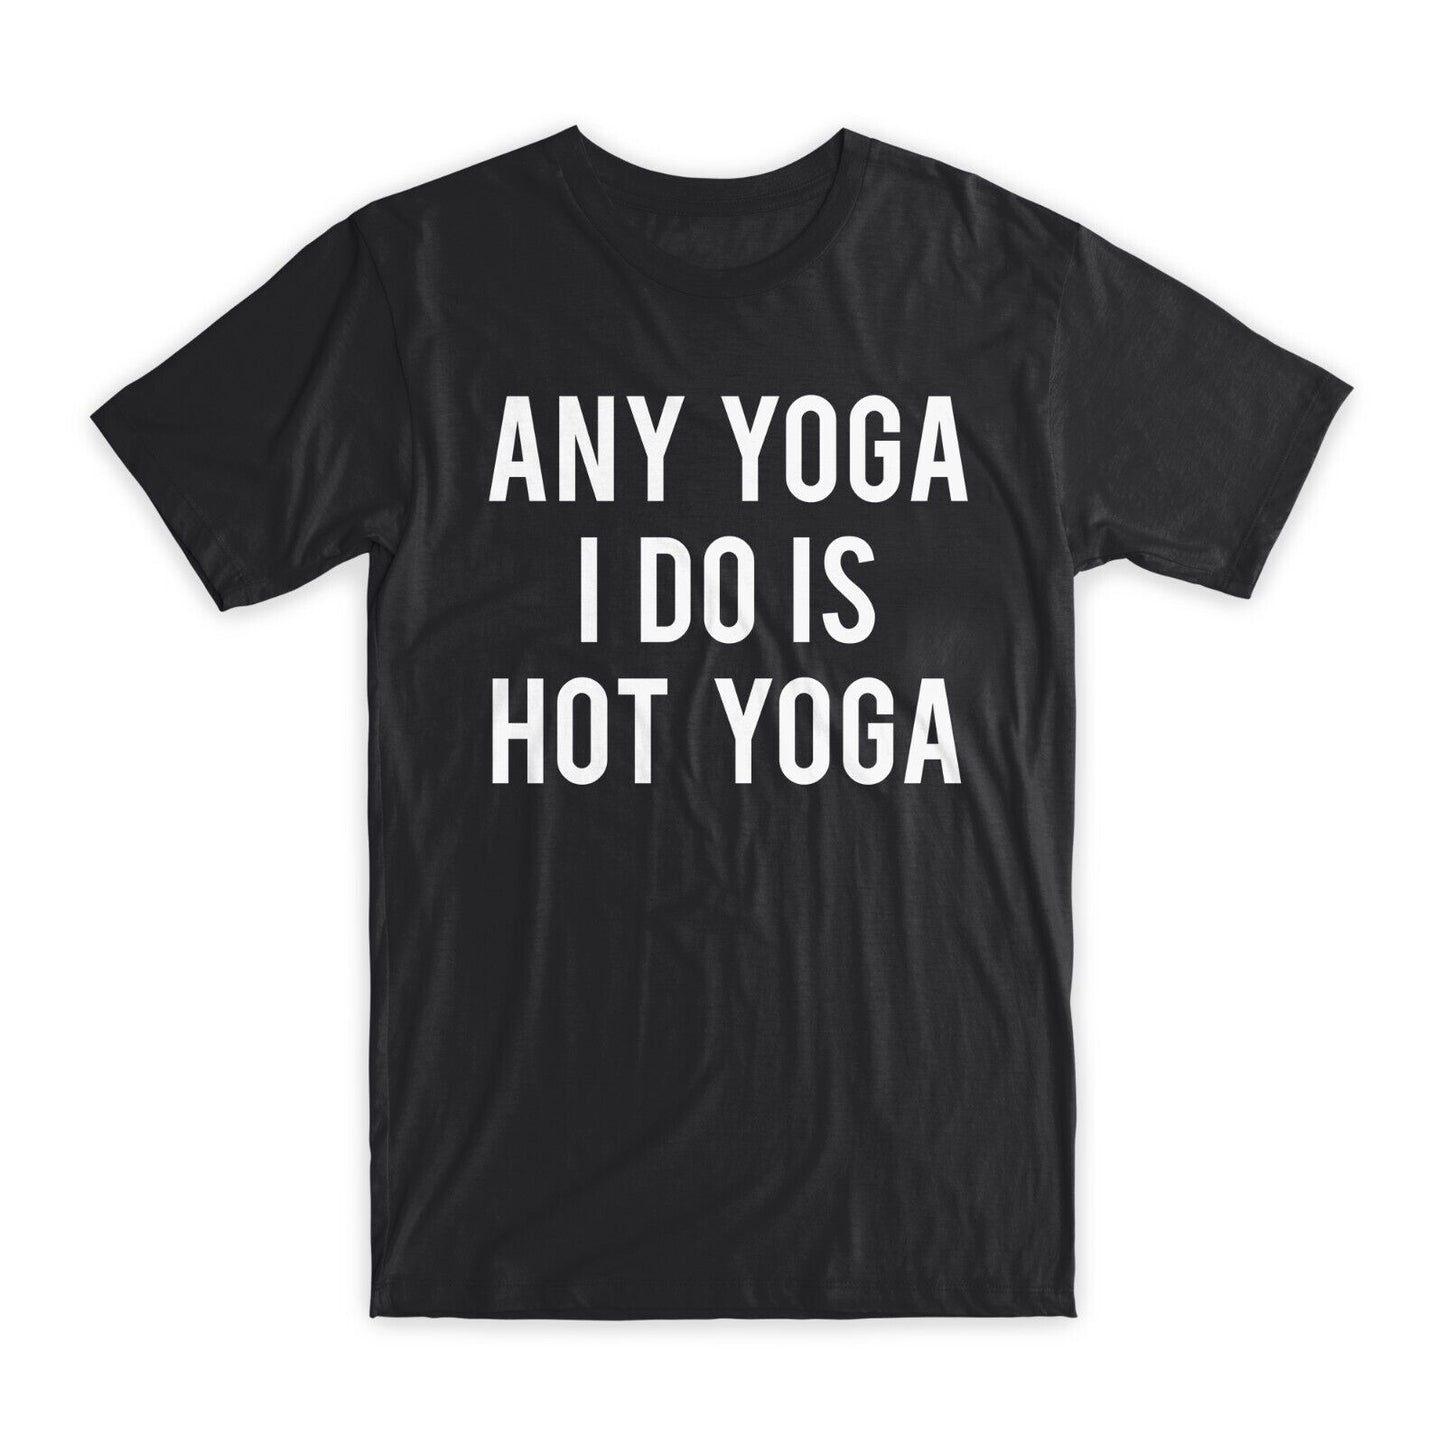 Any Yoga I Do is Hot Yoga T-Shirt Premium Cotton Crew Neck Funny Tees Gifts NEW